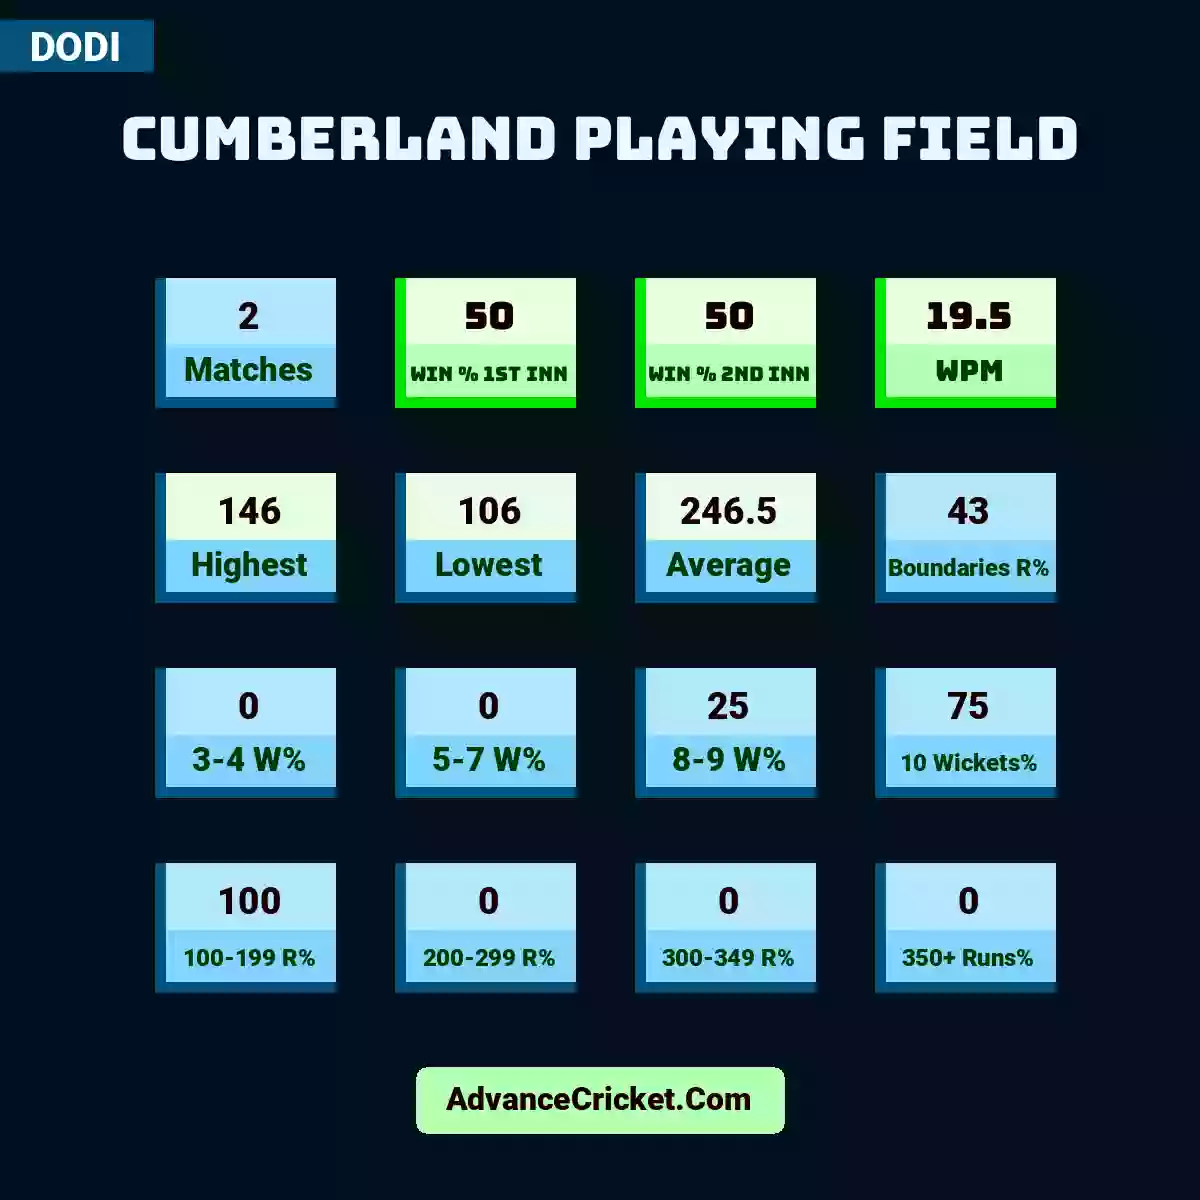 Image showing Cumberland Playing Field with Matches: 2, Win % 1st Inn: 50, Win % 2nd Inn: 50, WPM: 19.5, Highest: 146, Lowest: 106, Average: 246.5, Boundaries R%: 43, 3-4 W%: 0, 5-7 W%: 0, 8-9 W%: 25, 10 Wickets%: 75, 100-199 R%: 100, 200-299 R%: 0, 300-349 R%: 0, 350+ Runs%: 0.